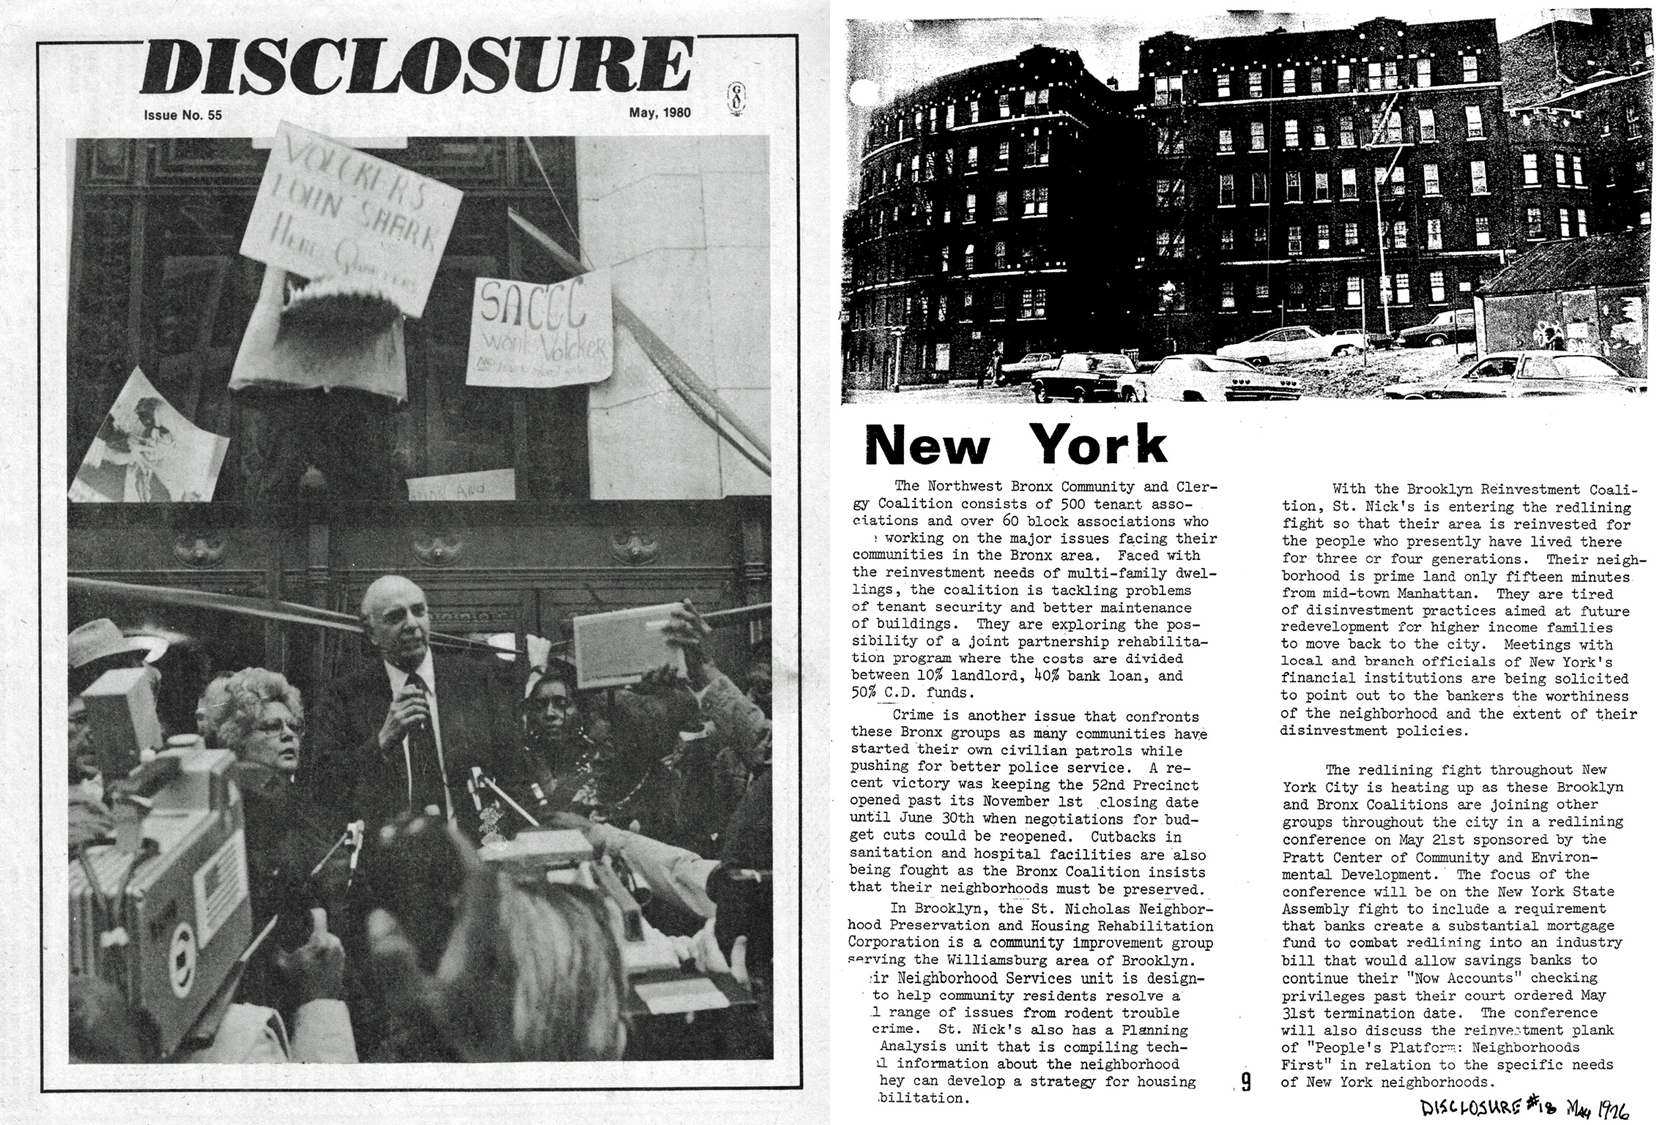 Cover of the May 1980 issue of Disclosure. Image courtesy of Ted Wysocki. A profile of NWBCCC from the May 1976 issue of Disclosure. Image courtesy of Gregory Jost.